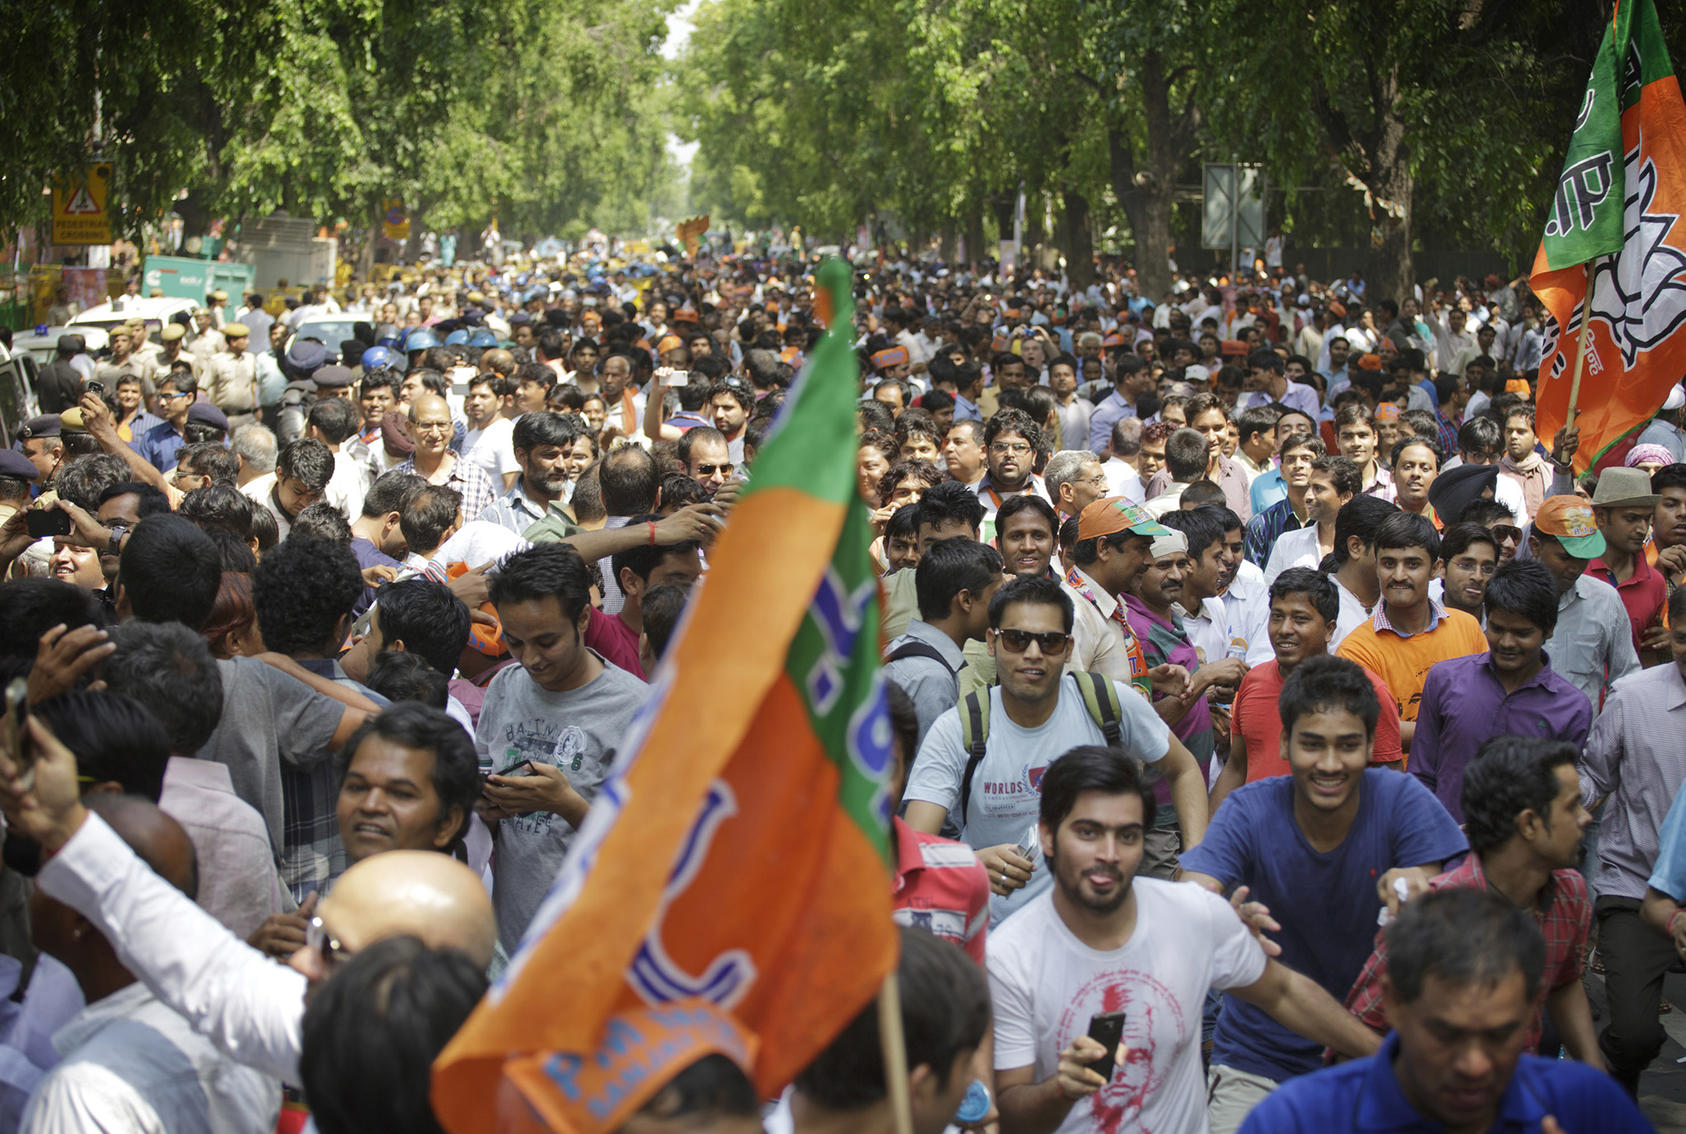 Supporters of Narendra Modi, the winning Bharatiya Janata Party­'s candidate for prime minister, run to follow his motorcade in New Delhi, May 17, 2014. (Kuni Takahashi/The New York Times)